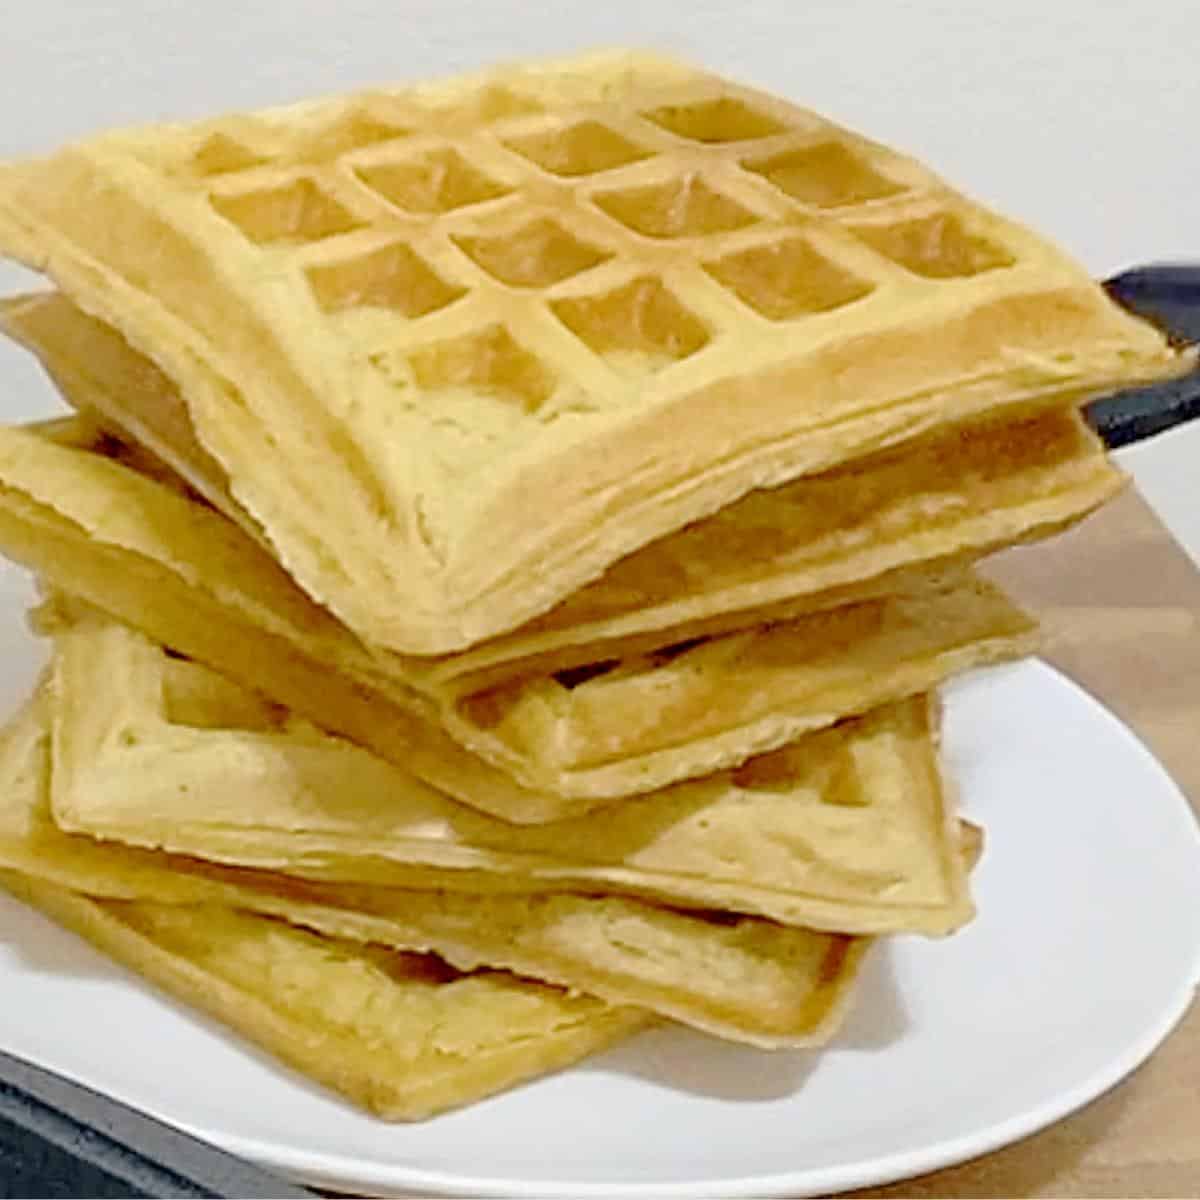 A stack of waffles on a plate.